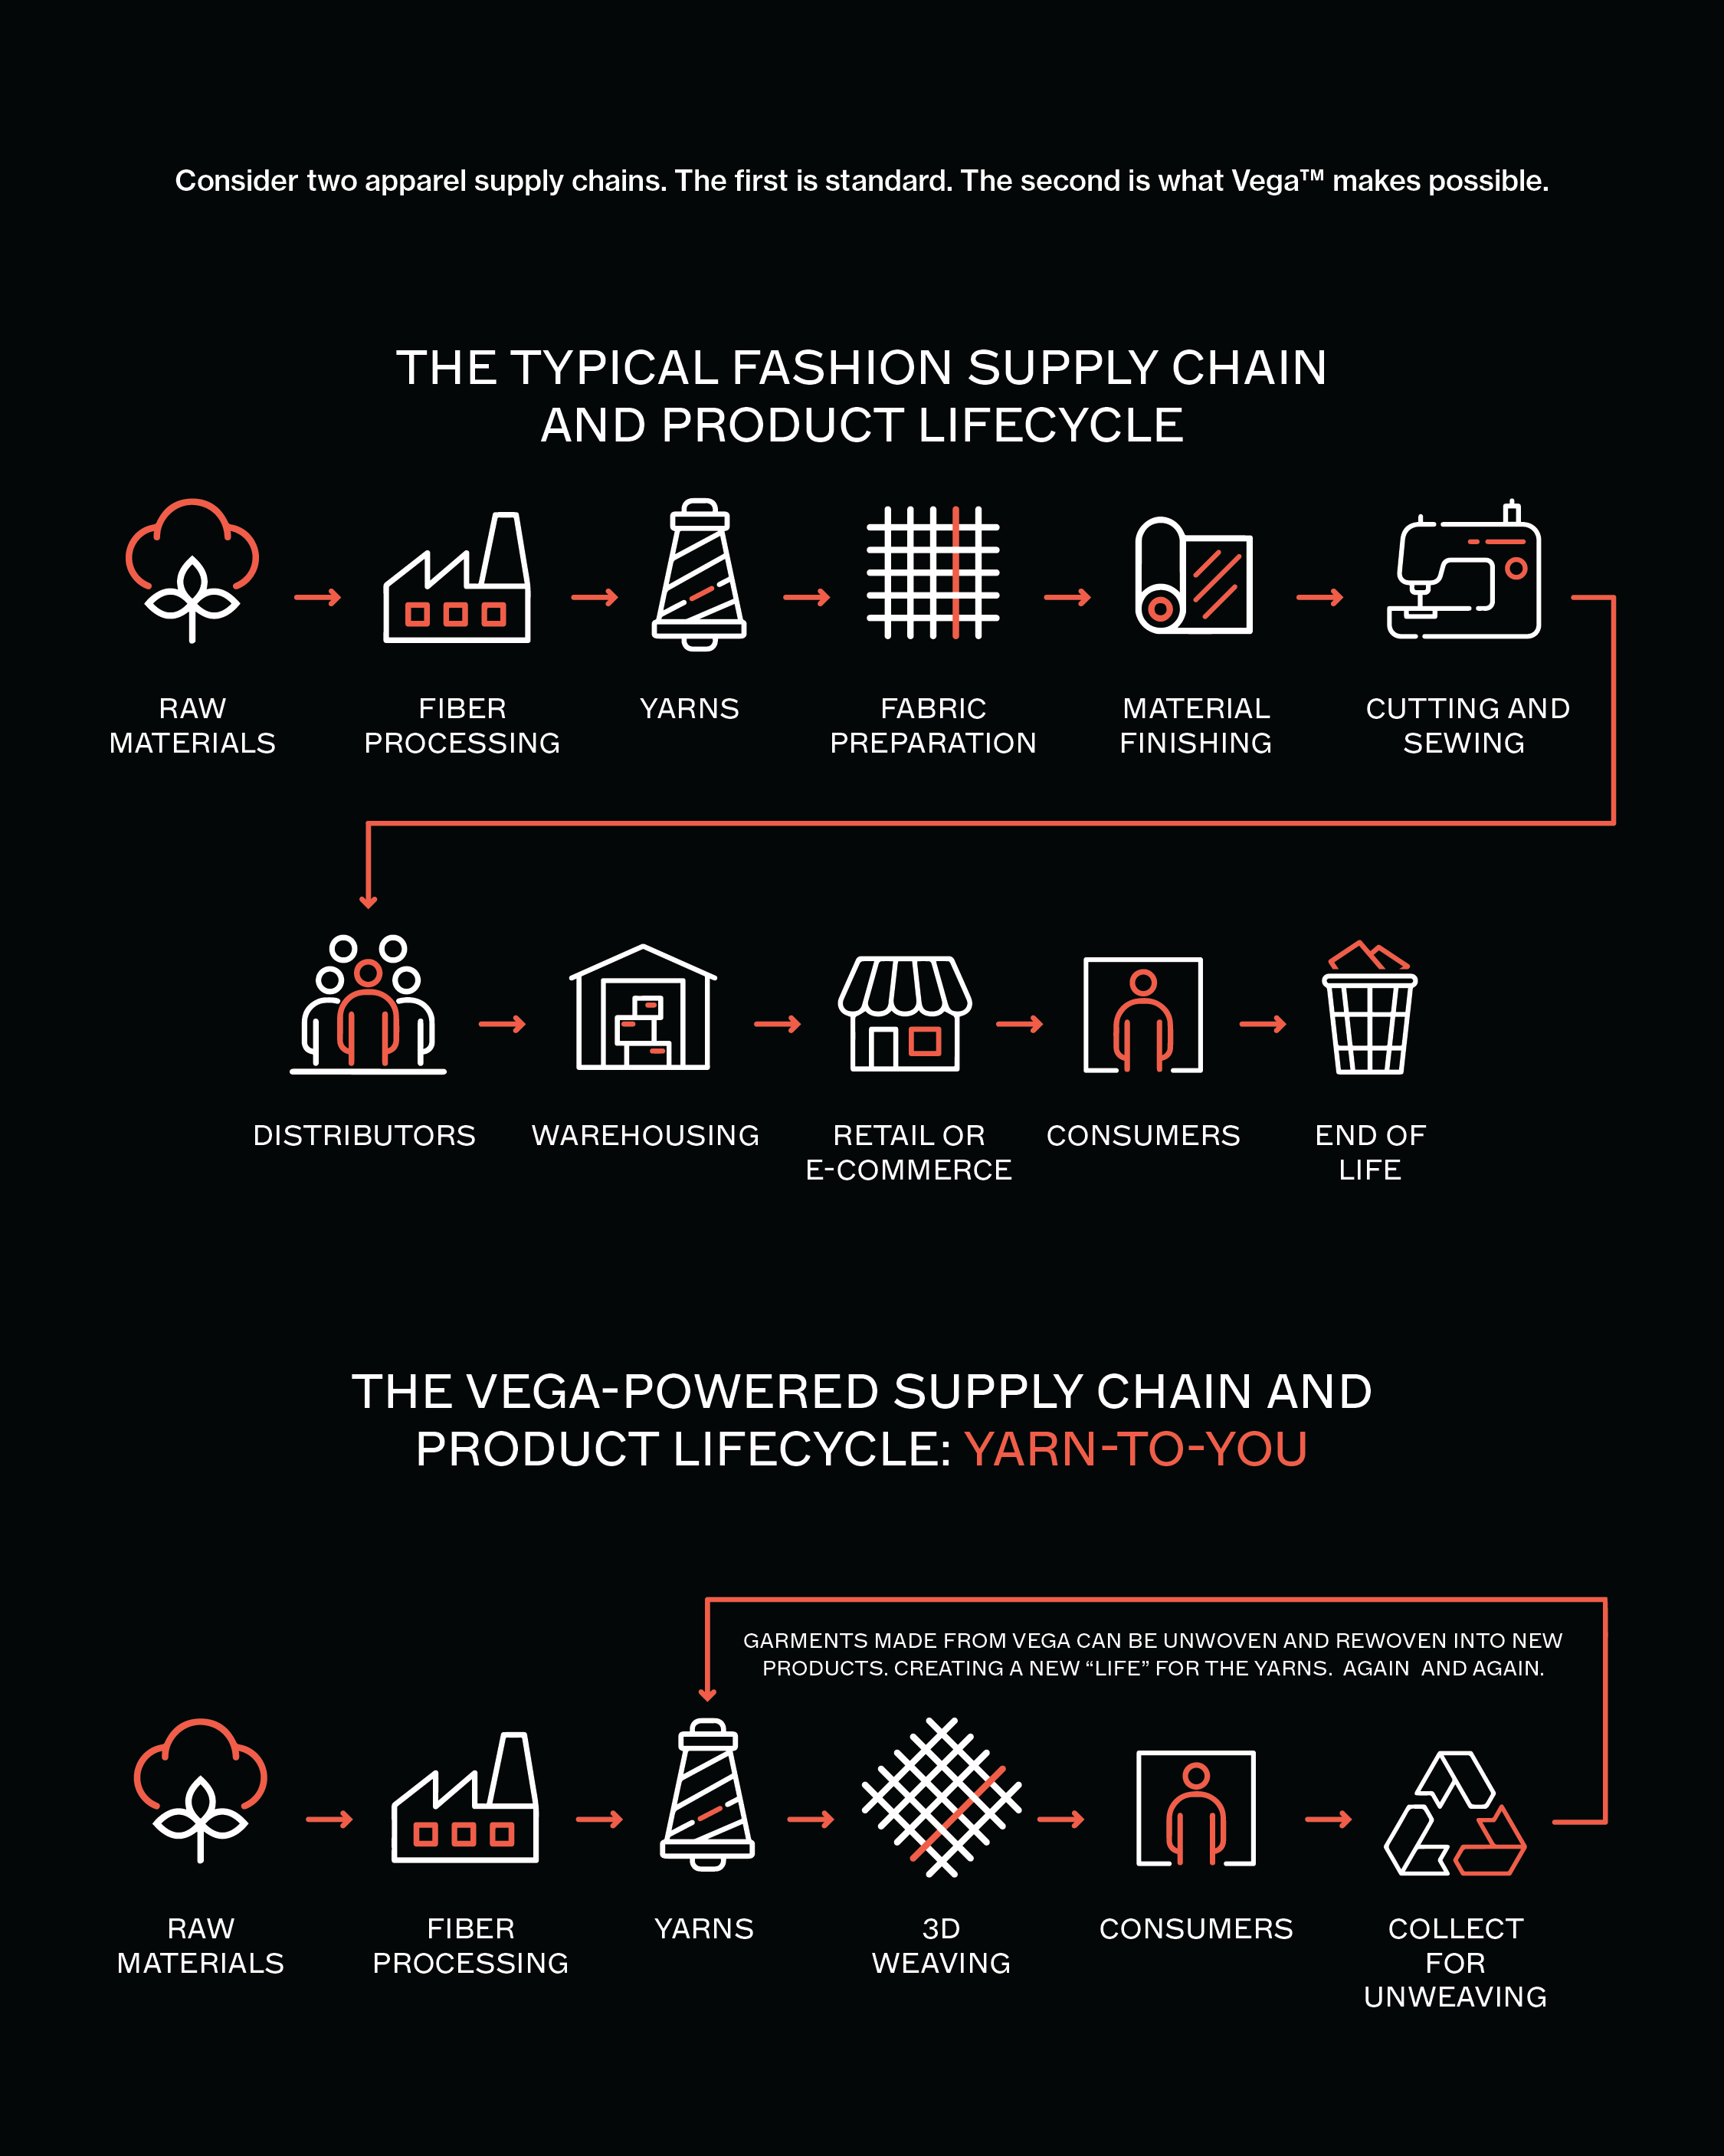 Chart comparing the Vega supply chain and the typical fashion supply chain.